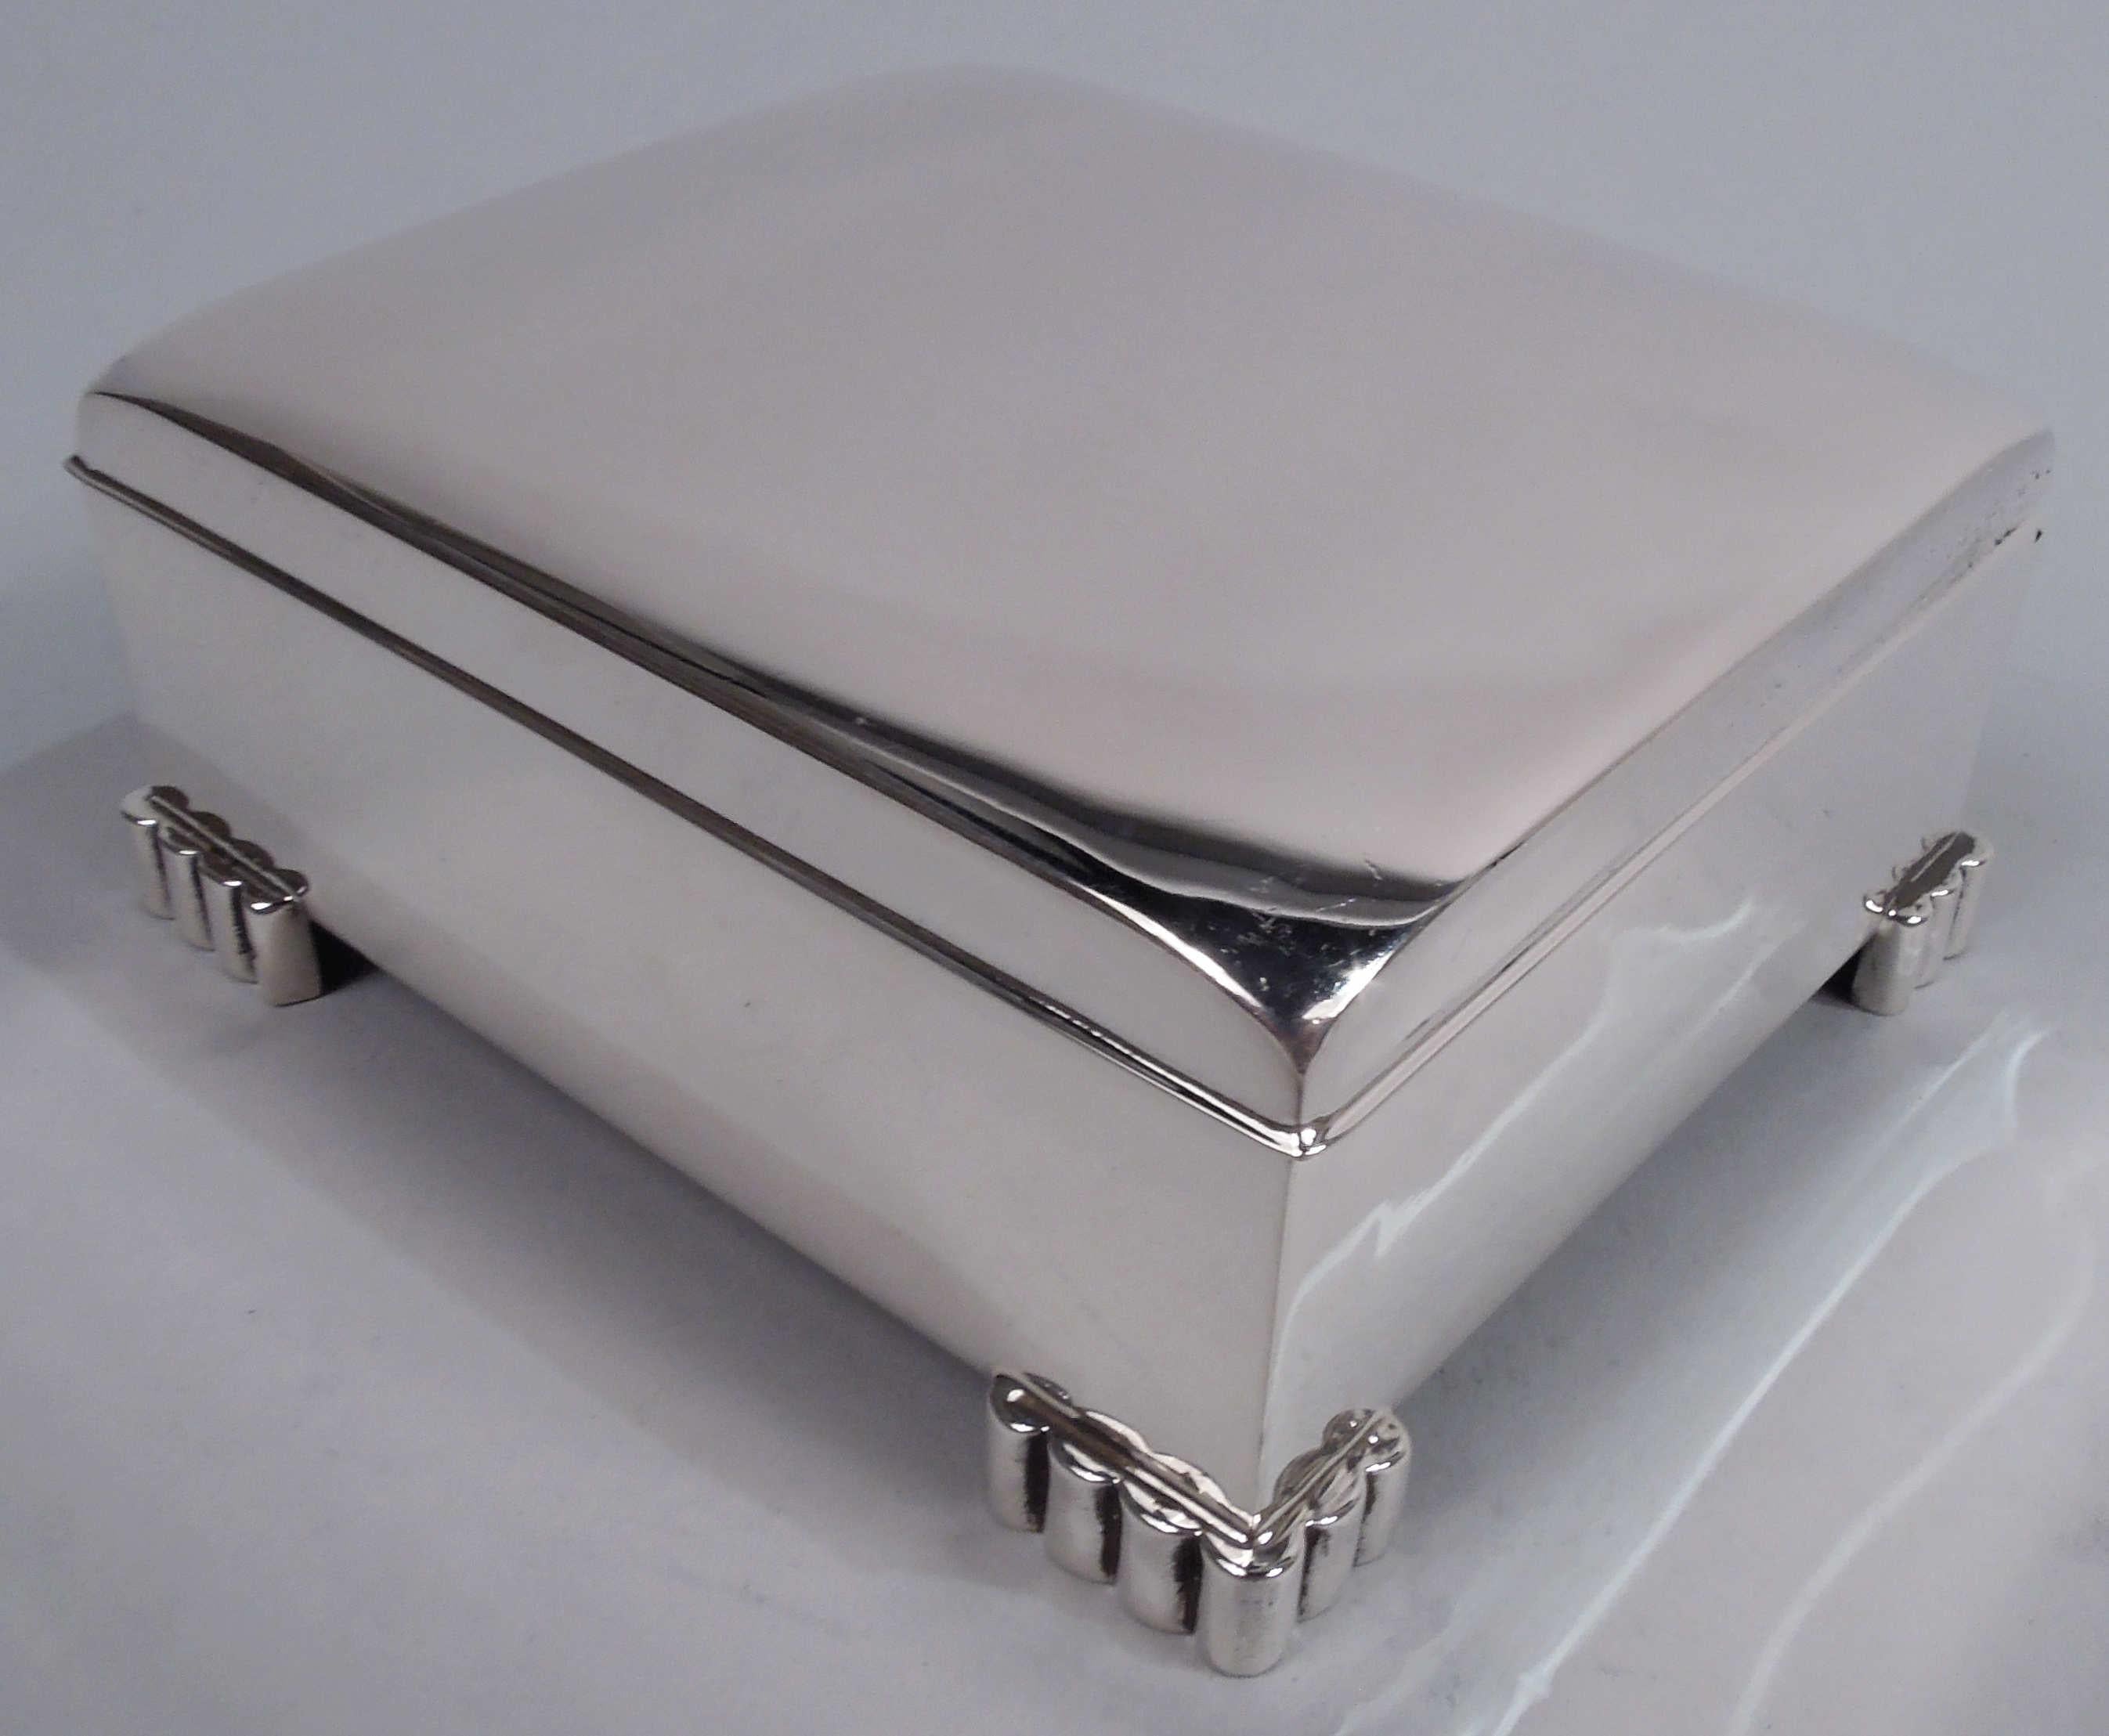 Midcentury Modern sterling silver box. Made by Poole in Taunton, Mass. Rectangular with straight sides. Cover hinged with curved top. Cast corner bracket supports in form of Classical colonnade. Box interior cedar lined. Open leather-lined